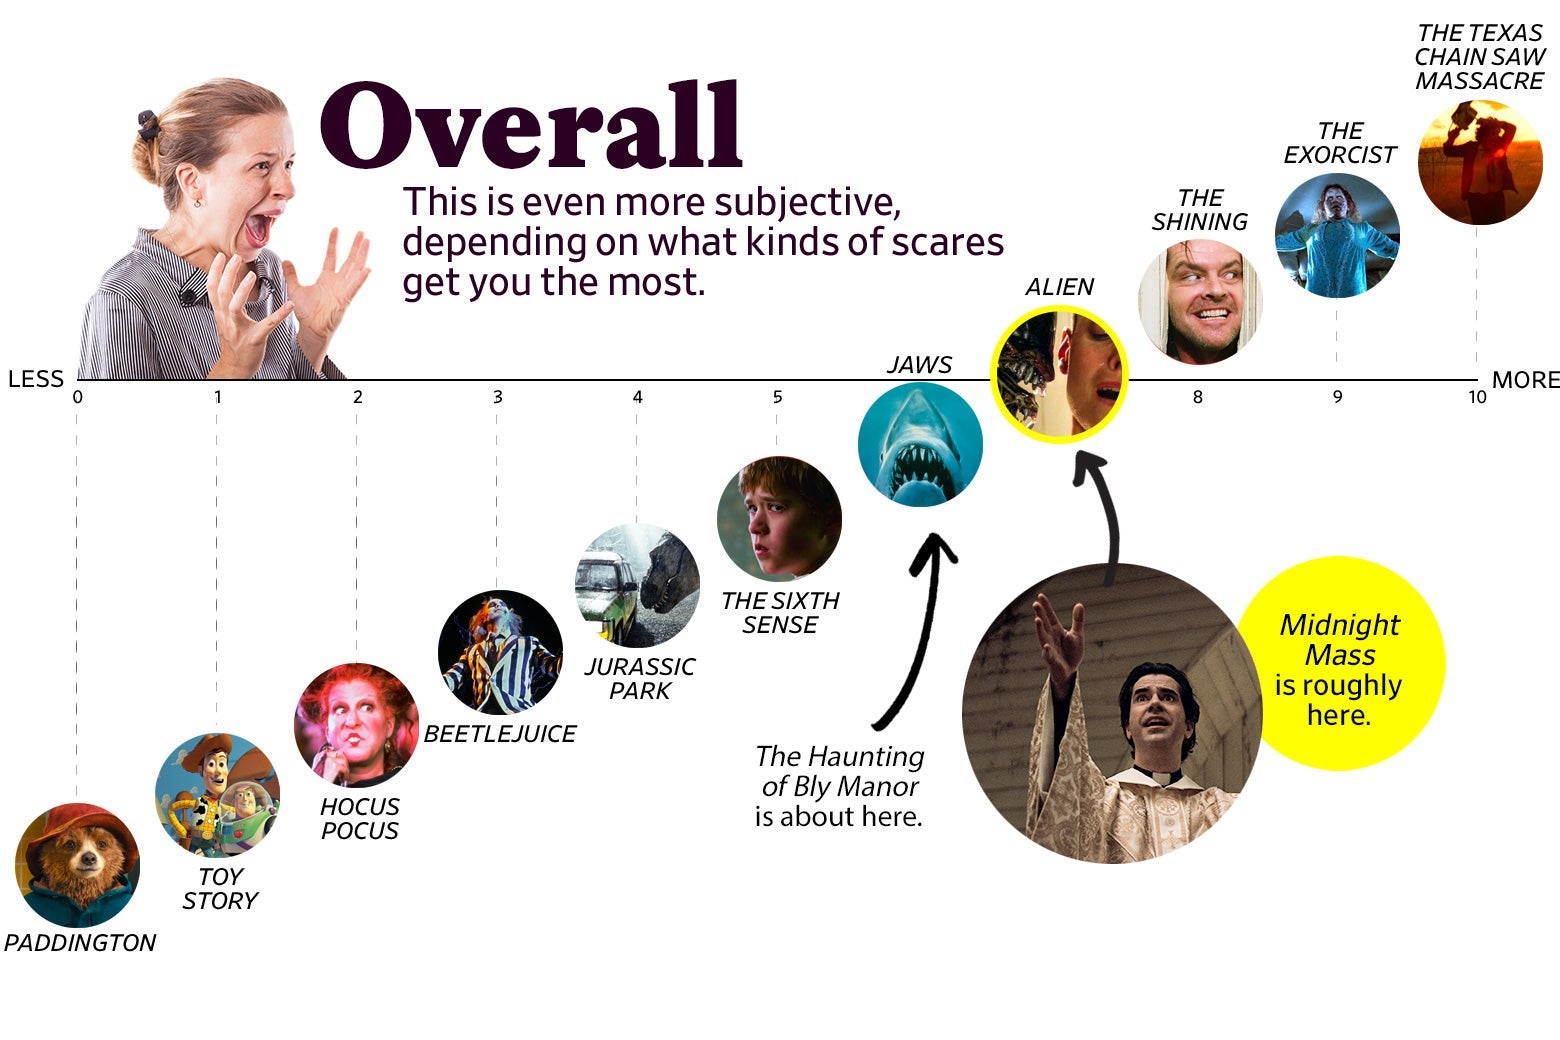 Overall: This is even more subjective, depending on what kinds of scares get you the most” shows that Midnight Mass ranks as a 7 overall, roughly the same as Alien. Bly Manor ranked a 6, roughly the same as Jaws. The scale ranges from Paddington (0) to the original Texas Chain Saw Massacre (10). 